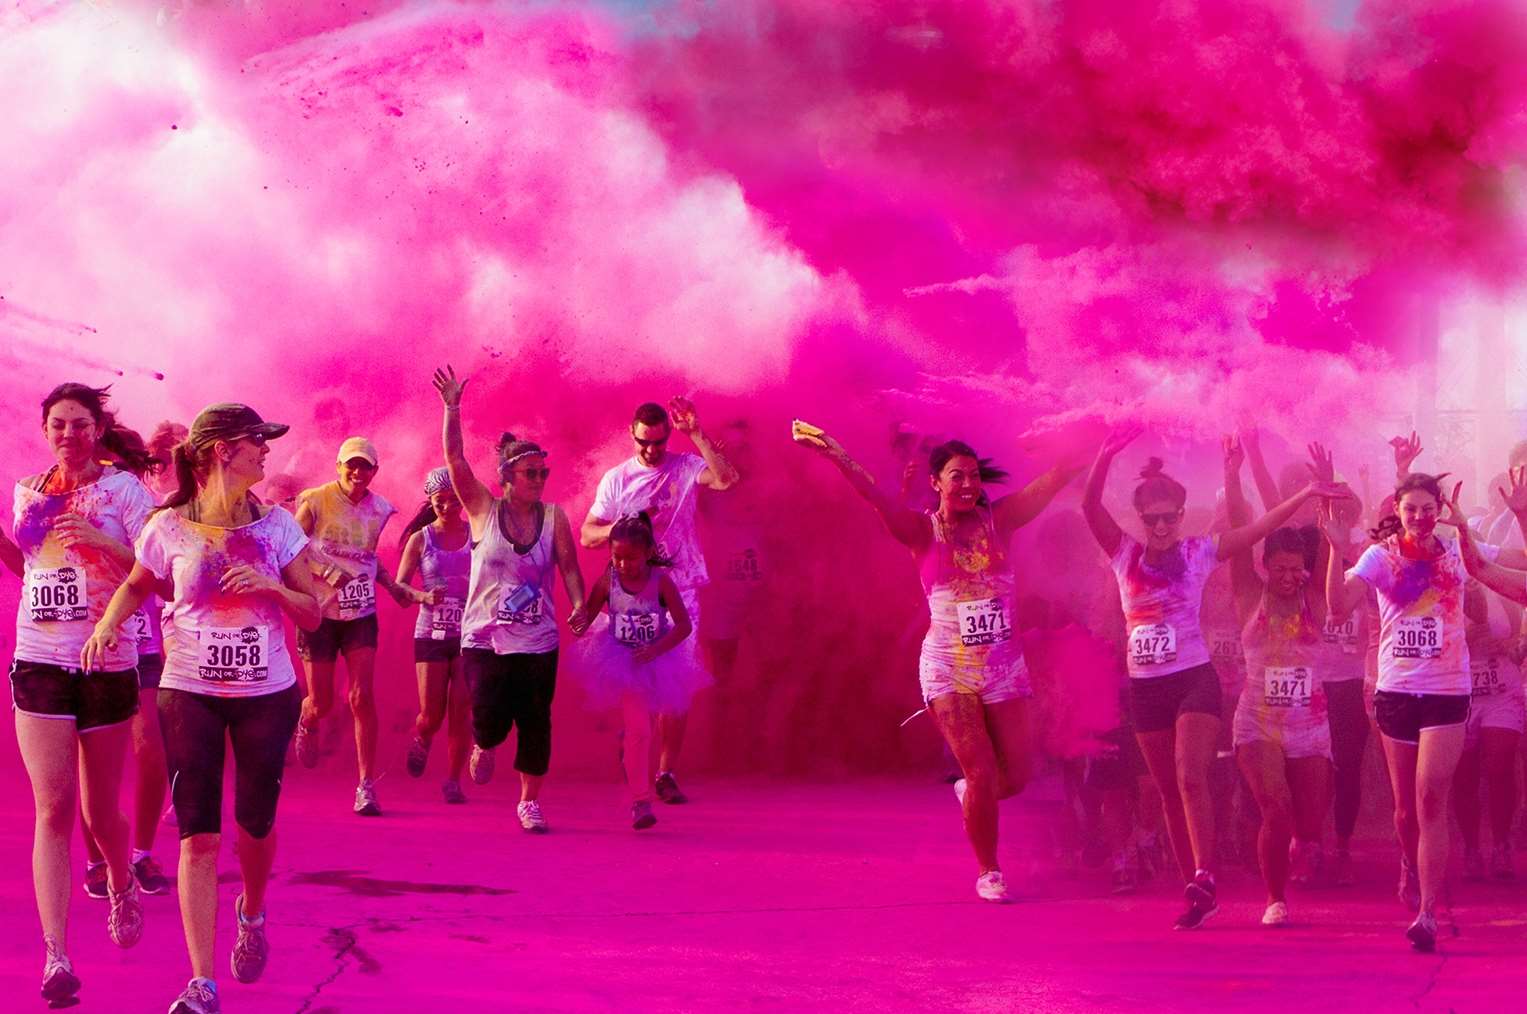 Run or Dye said over 5,000 locals registered for the run last year